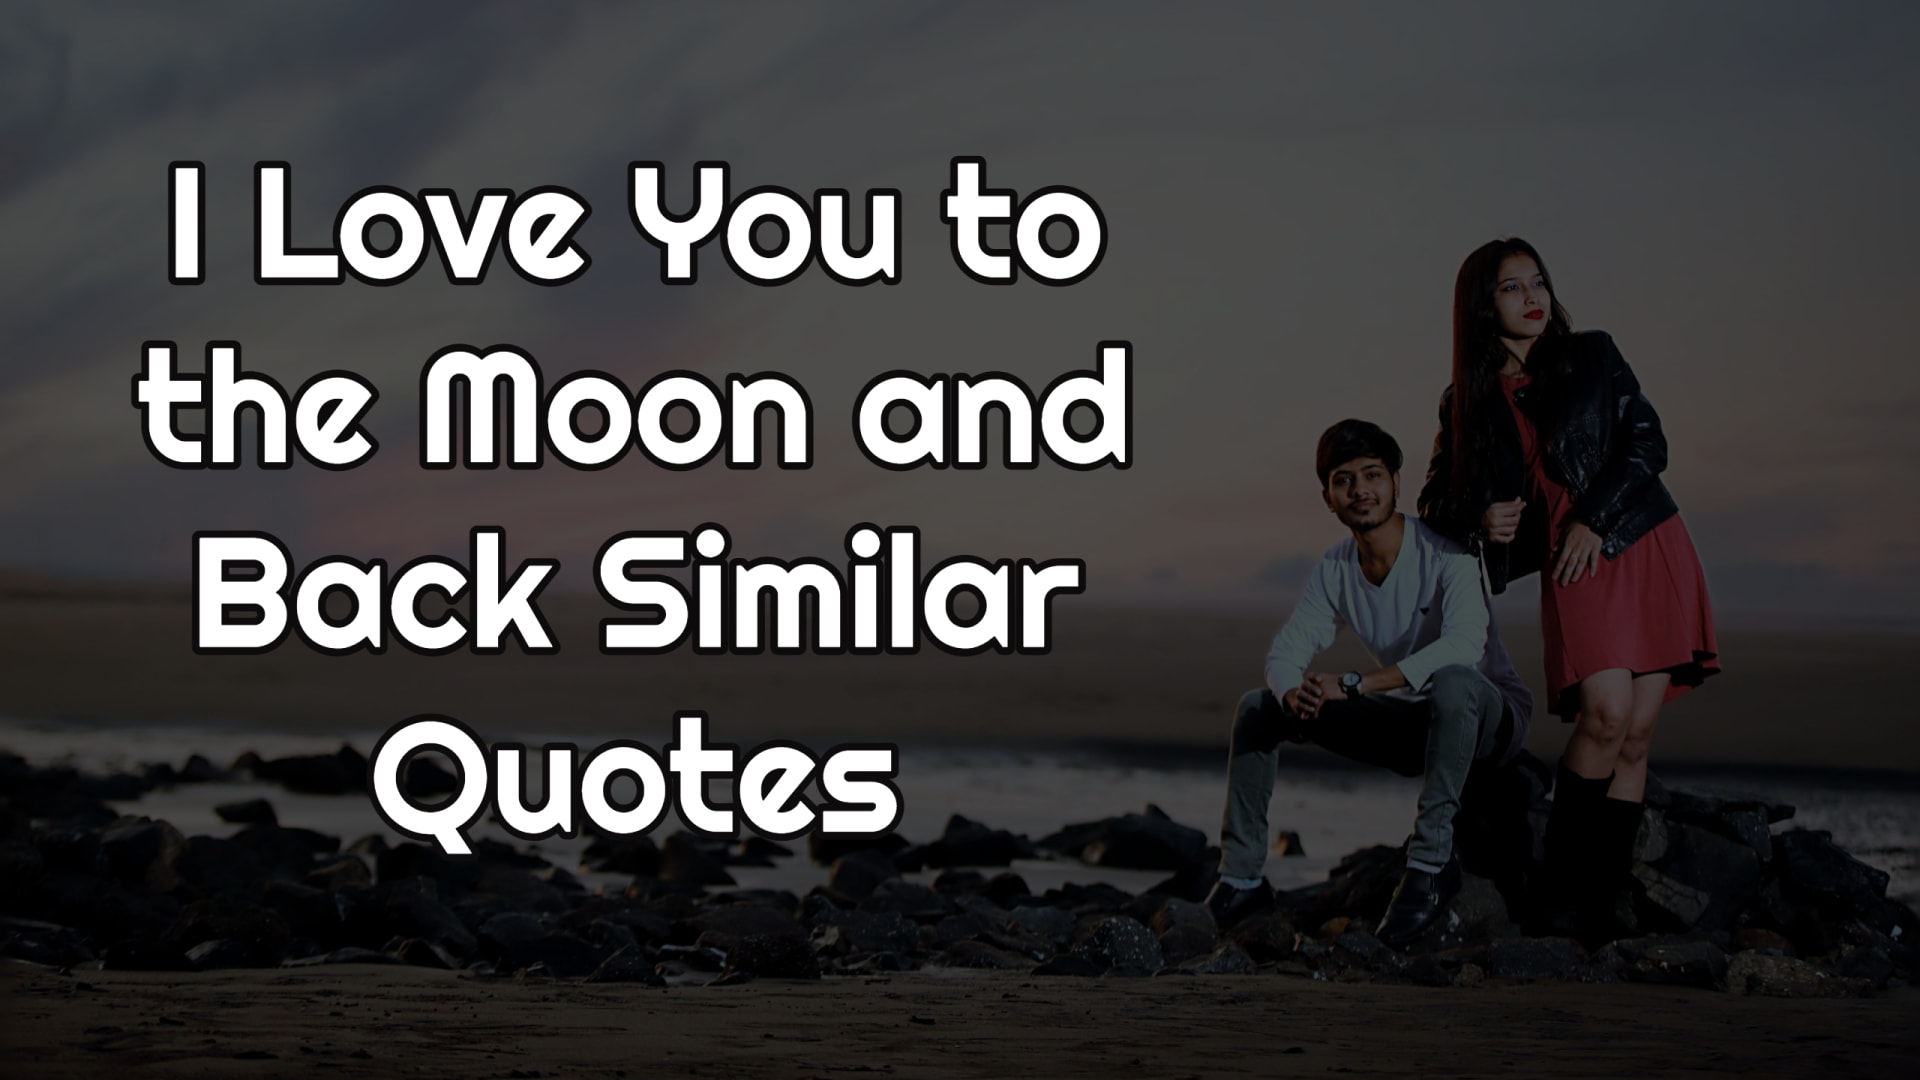 I Love You to the Moon and Back Similar Quotes